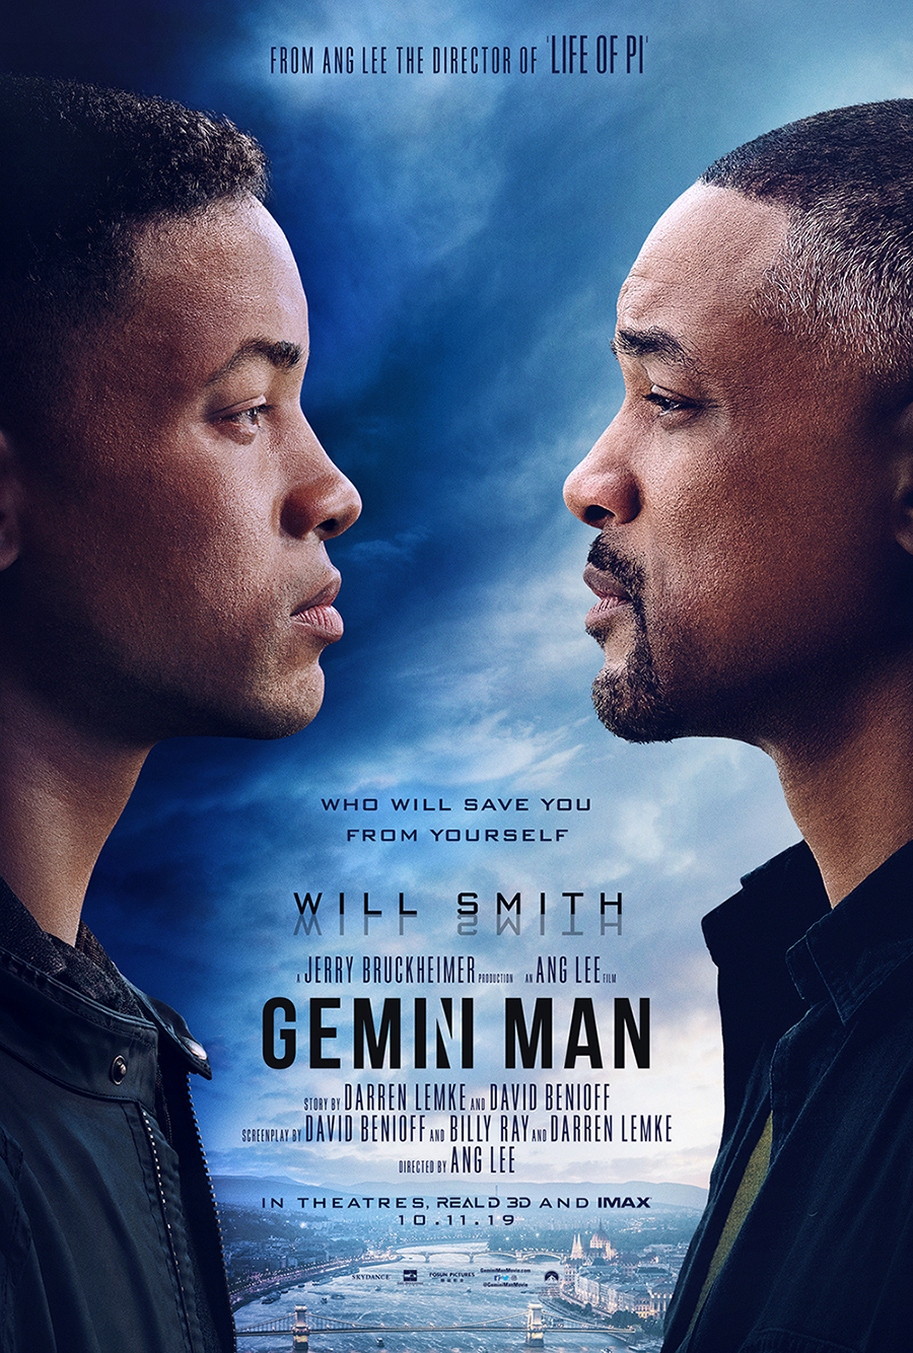 Will Smith, Gemini Man, Ang Lee, Jerry Bruckheimer, science fiction, thriller, 2019